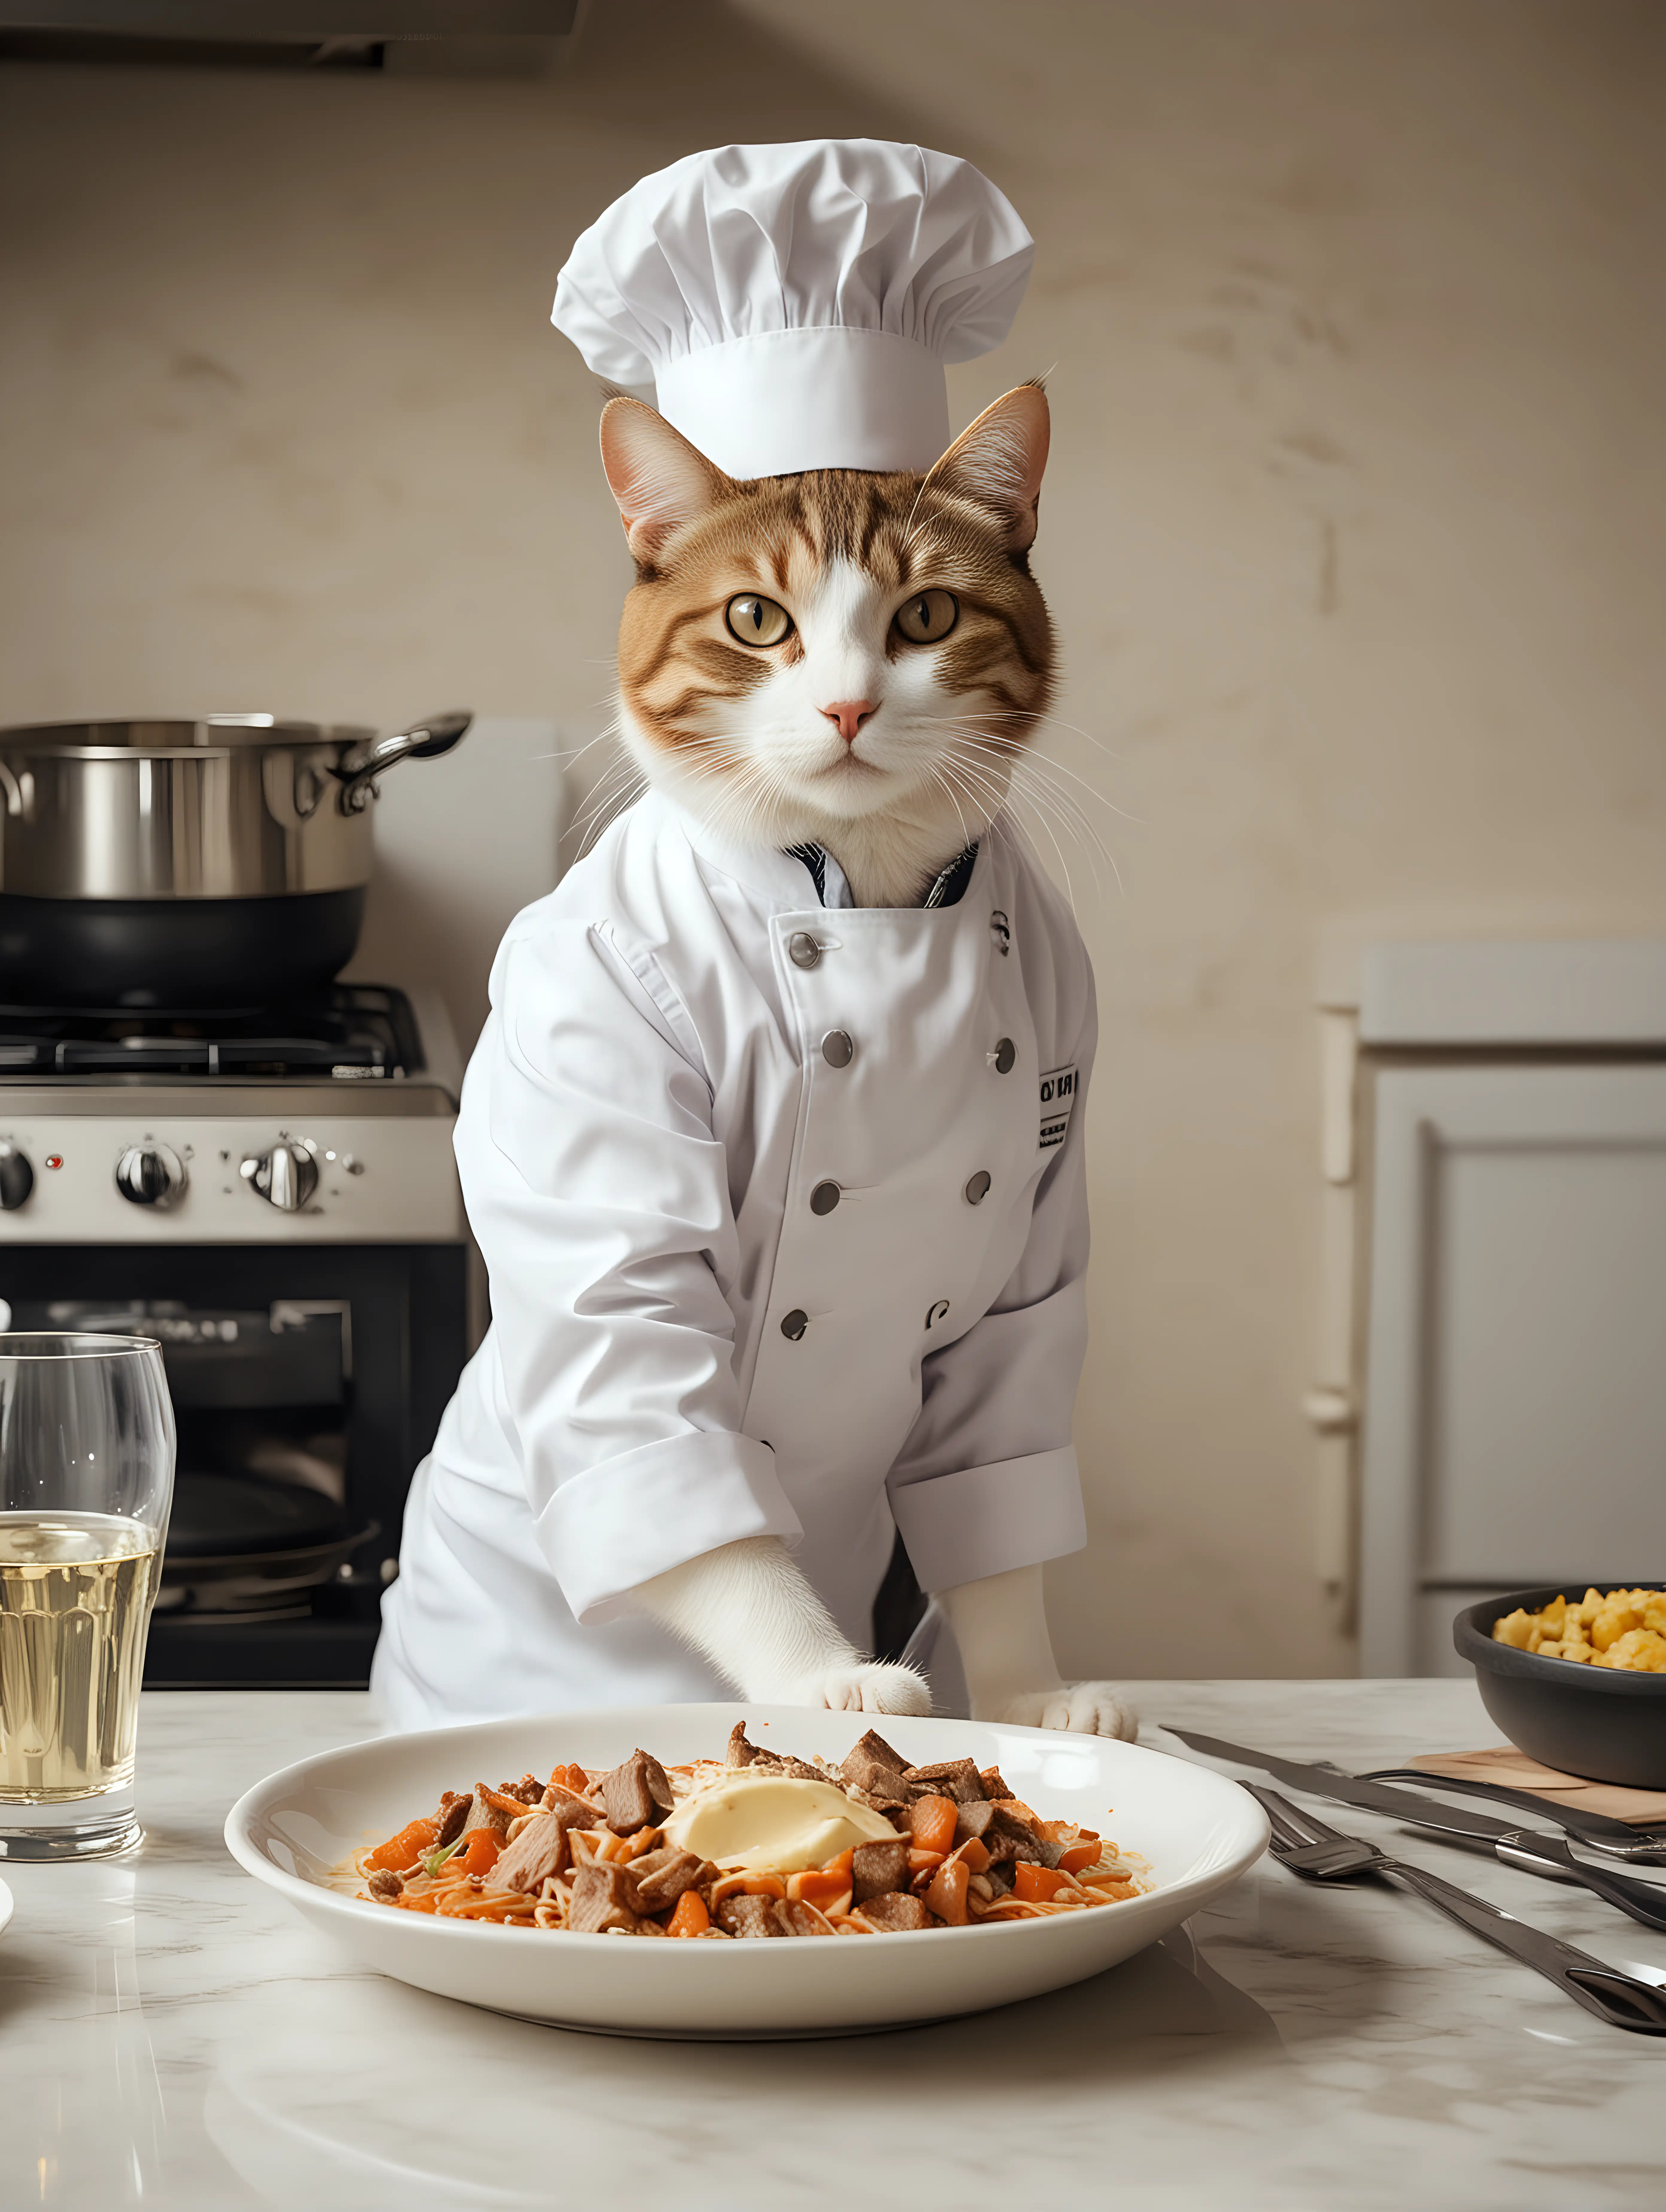 A photo of a domestic cat in a French chef's uniform, preparing a meal.